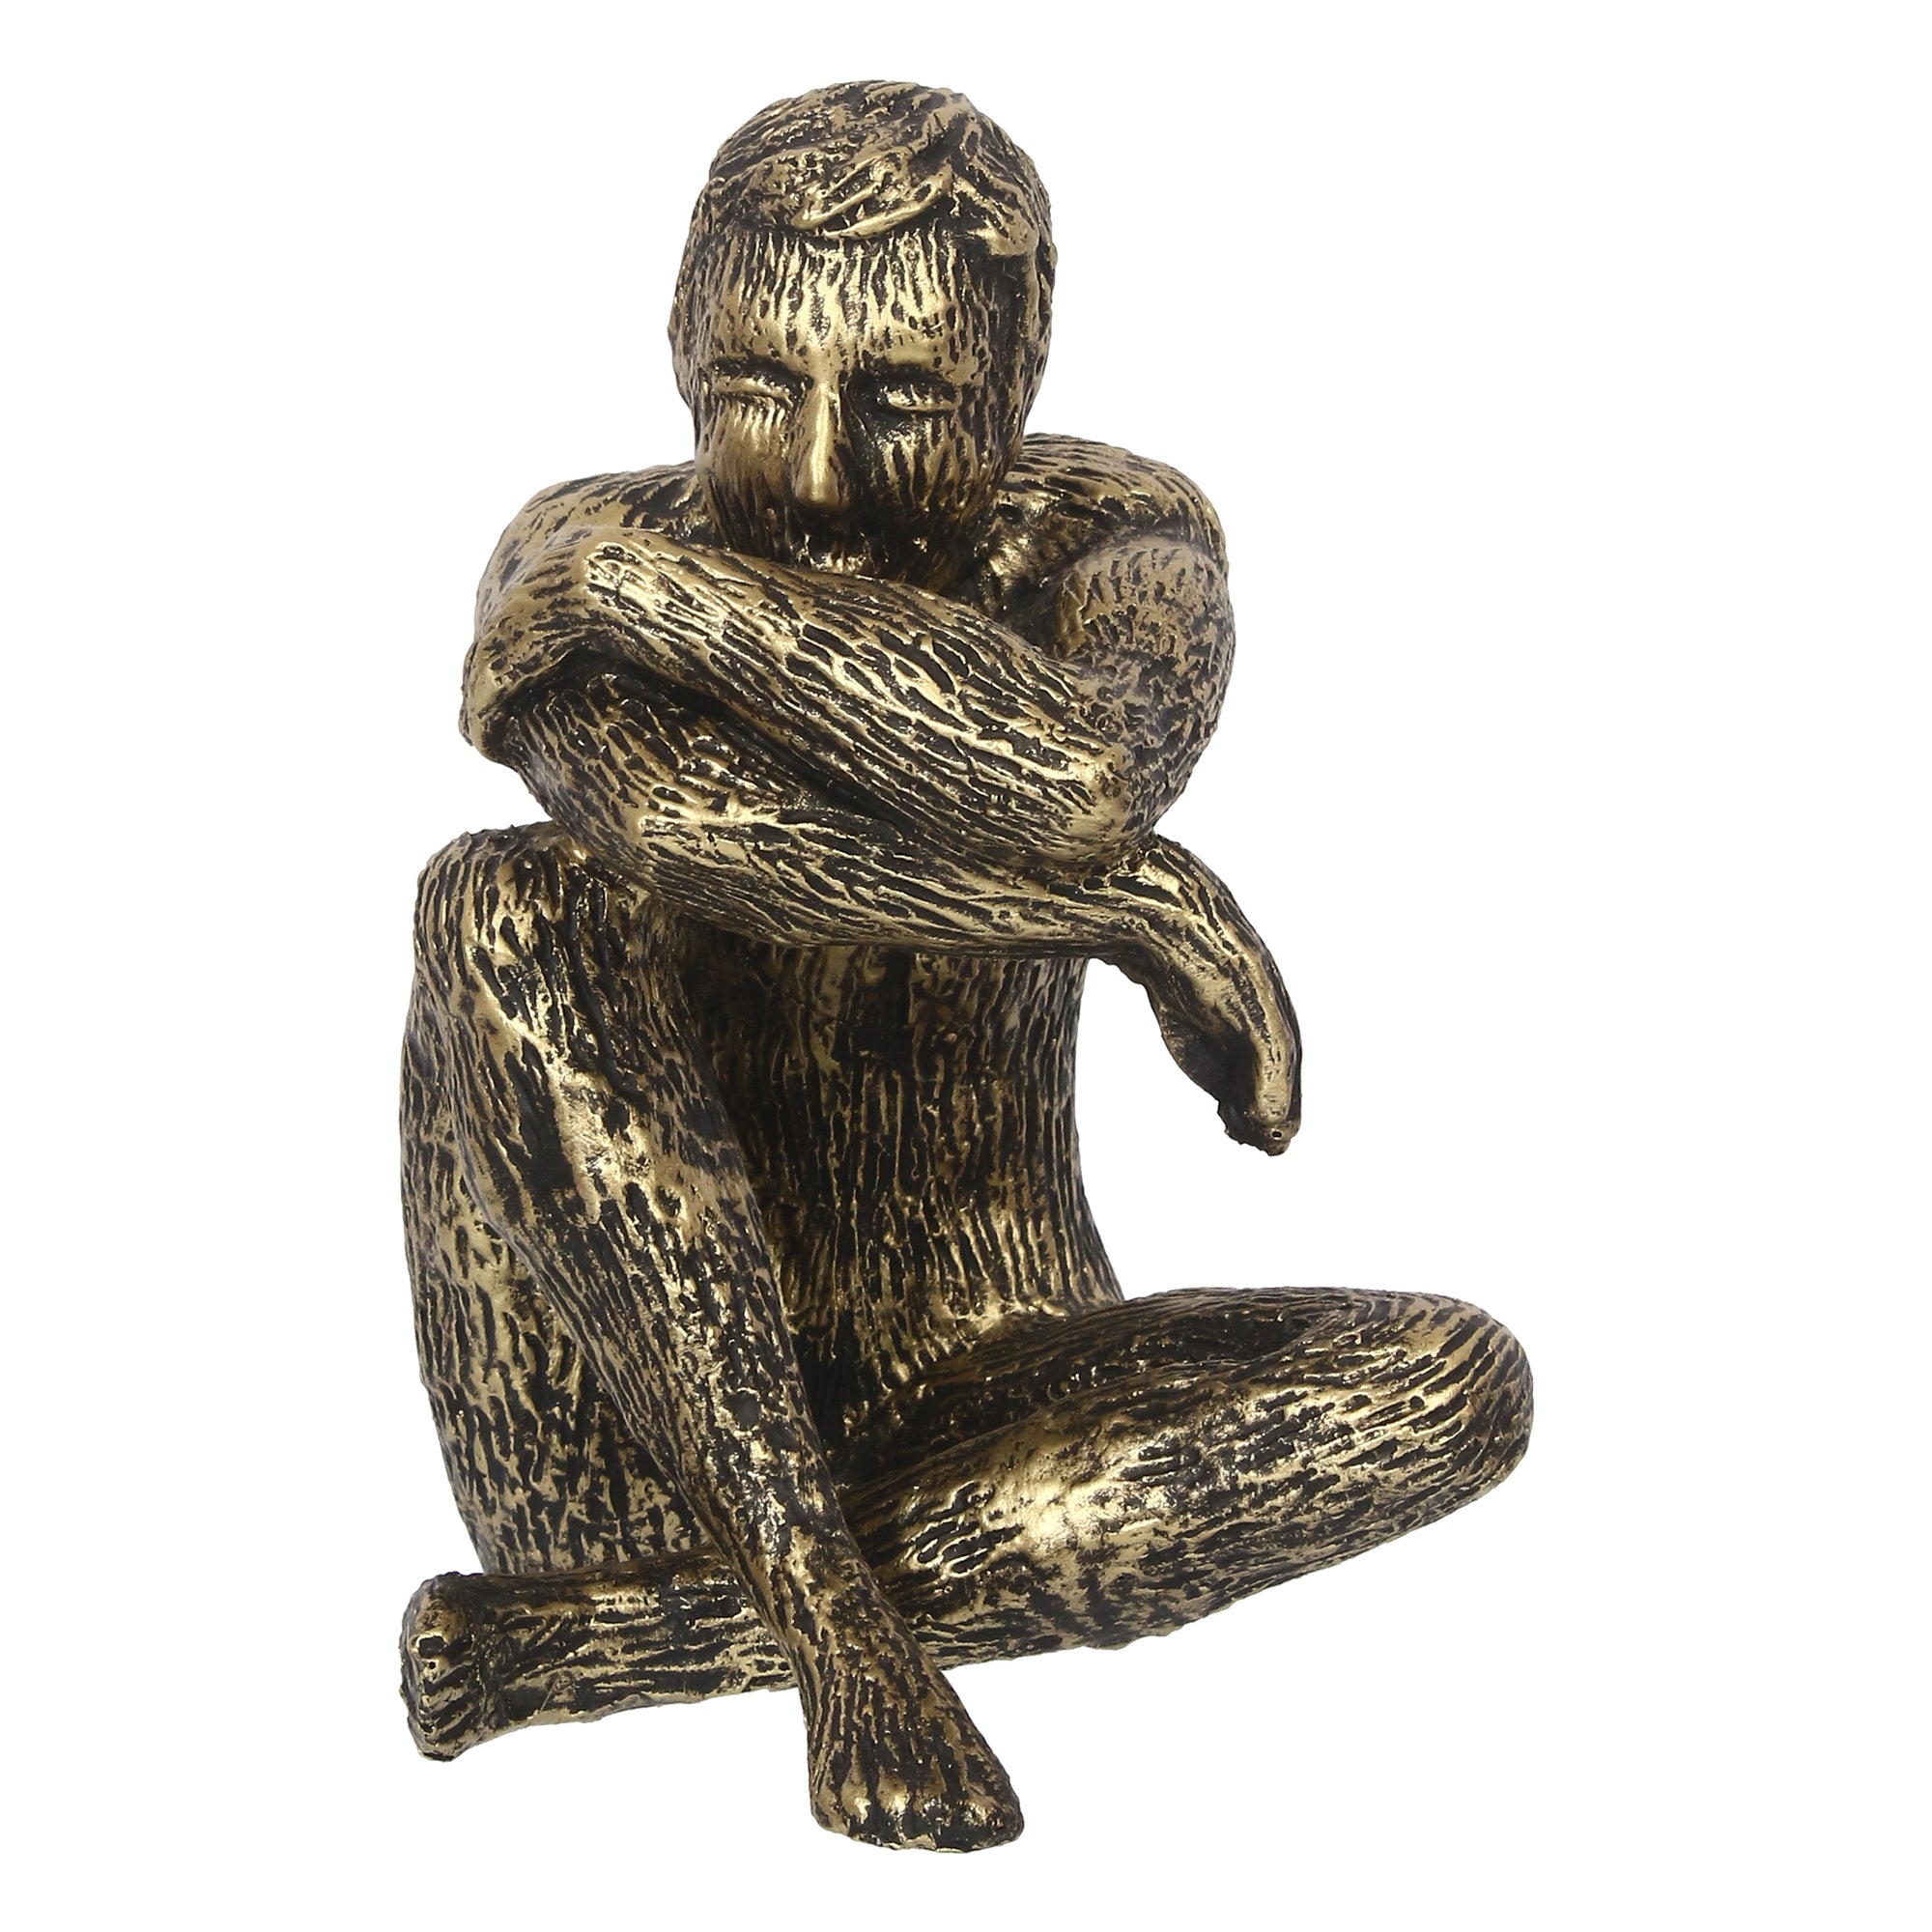 Golden and Black Polyresin Man Figurine Sitting in Thinking Position 3